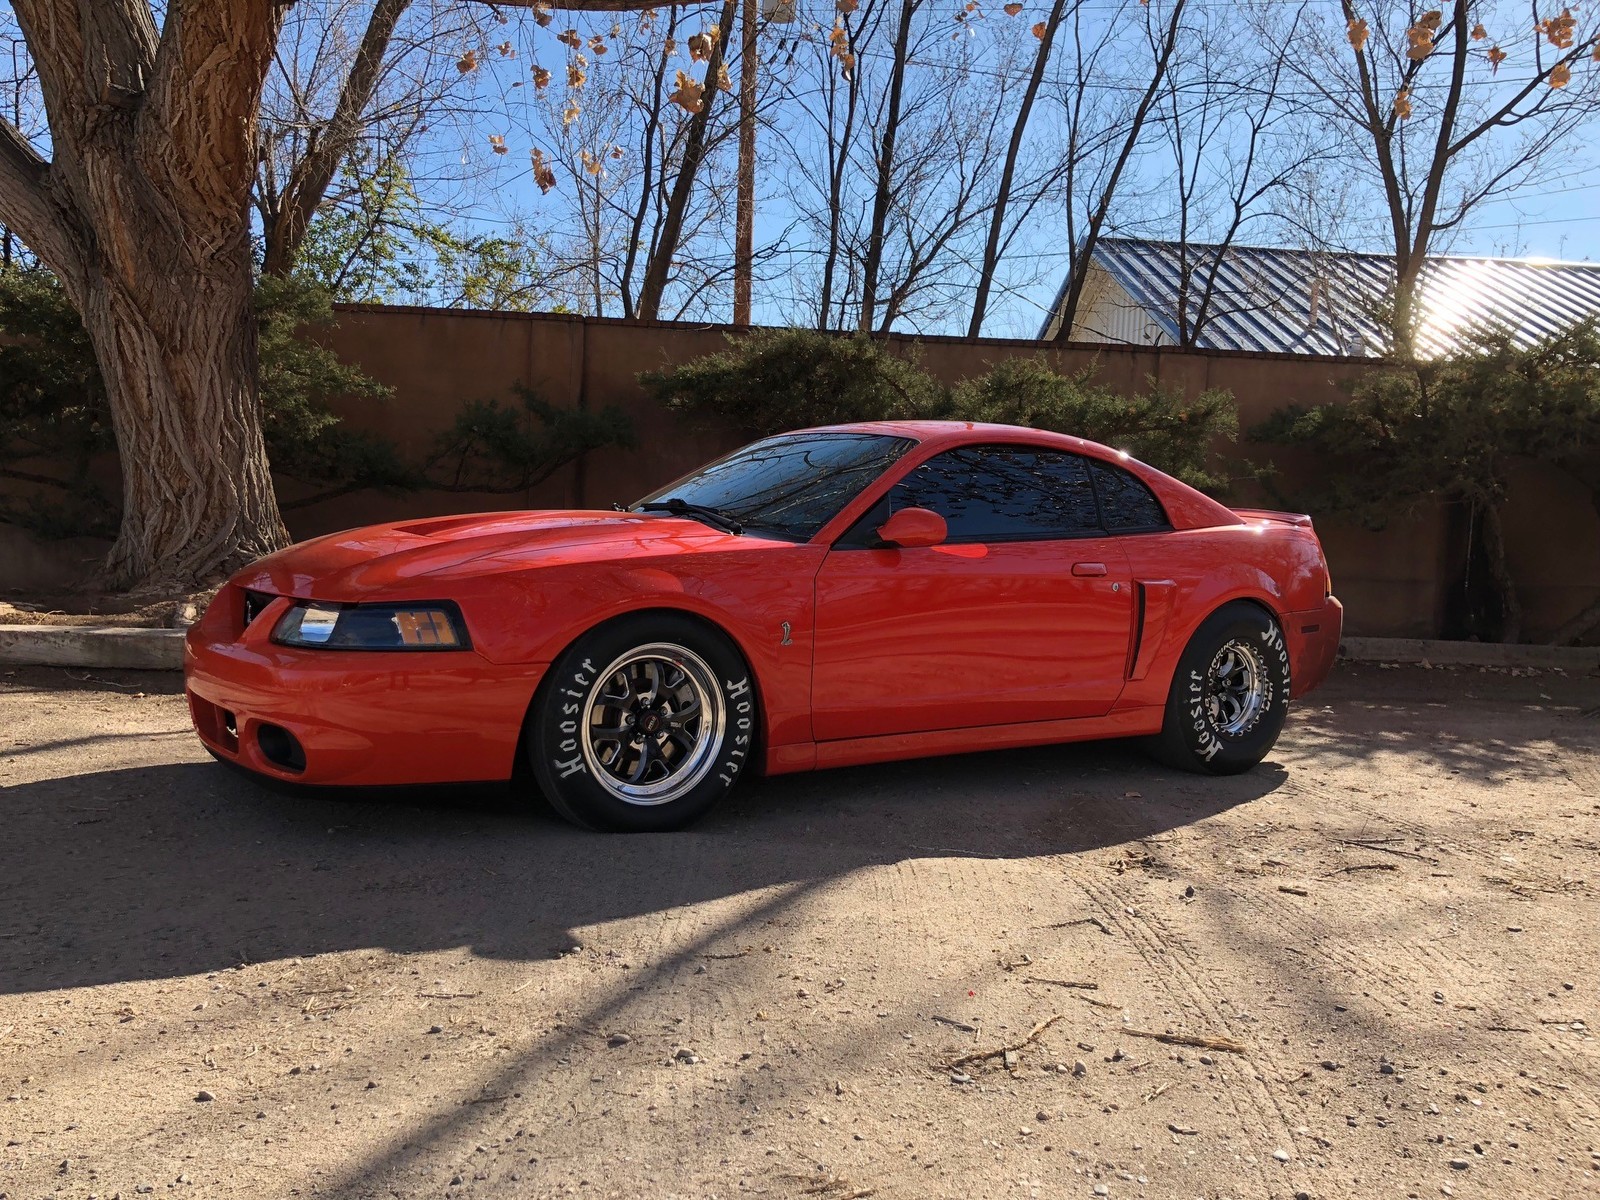 2004 Orange Ford Mustang Cobra picture, mods, upgrades